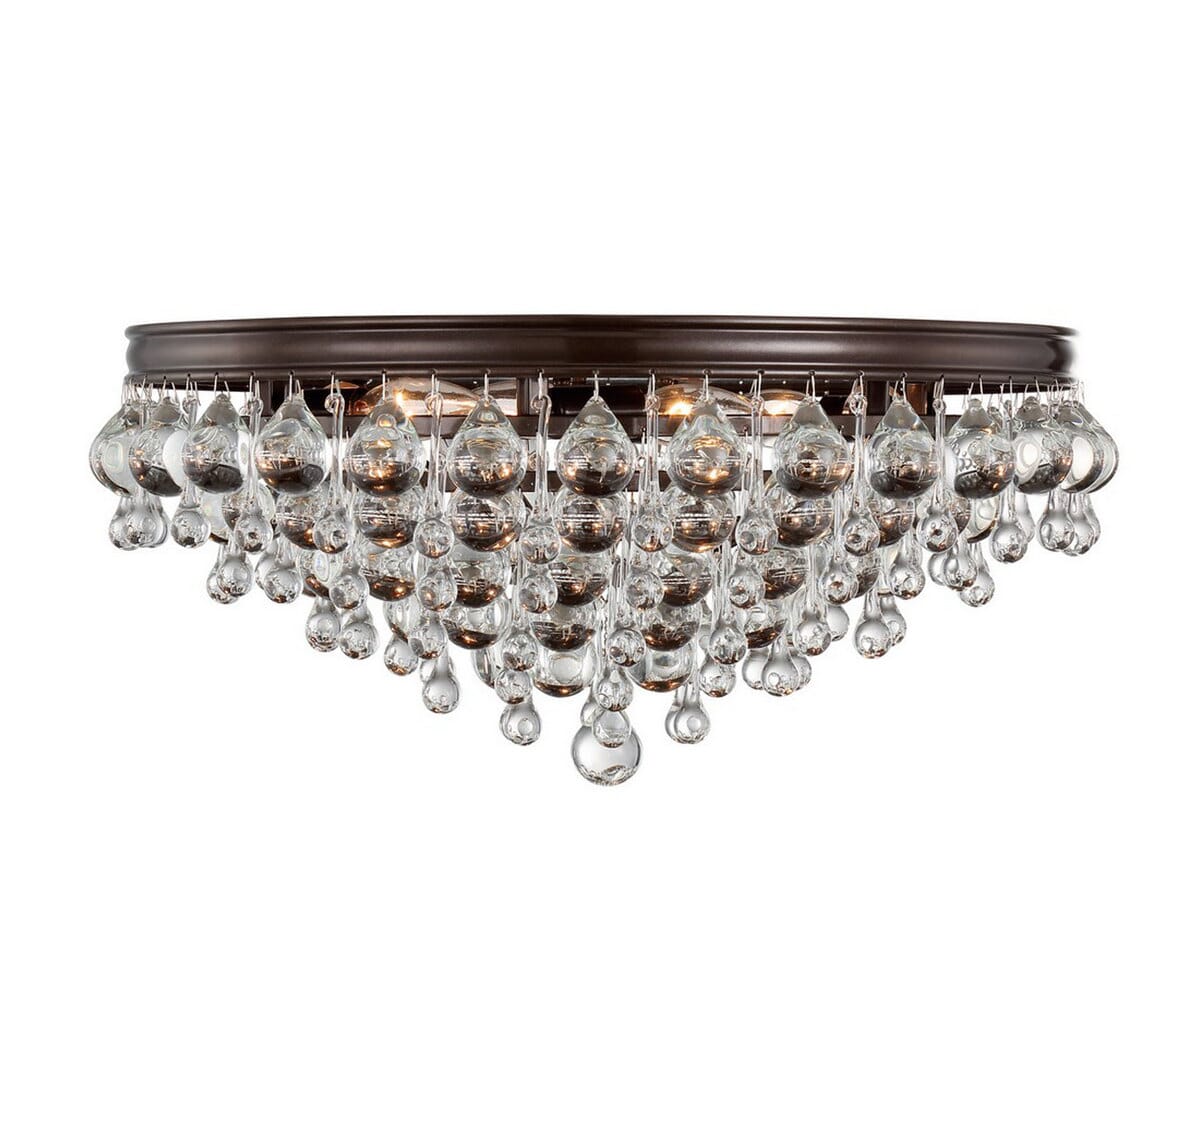 Calypso 6-Light 20"" Ceiling Light in Vibrant Bronze with Clear Glass Drops Crystals -  Crystorama, 138-VZ